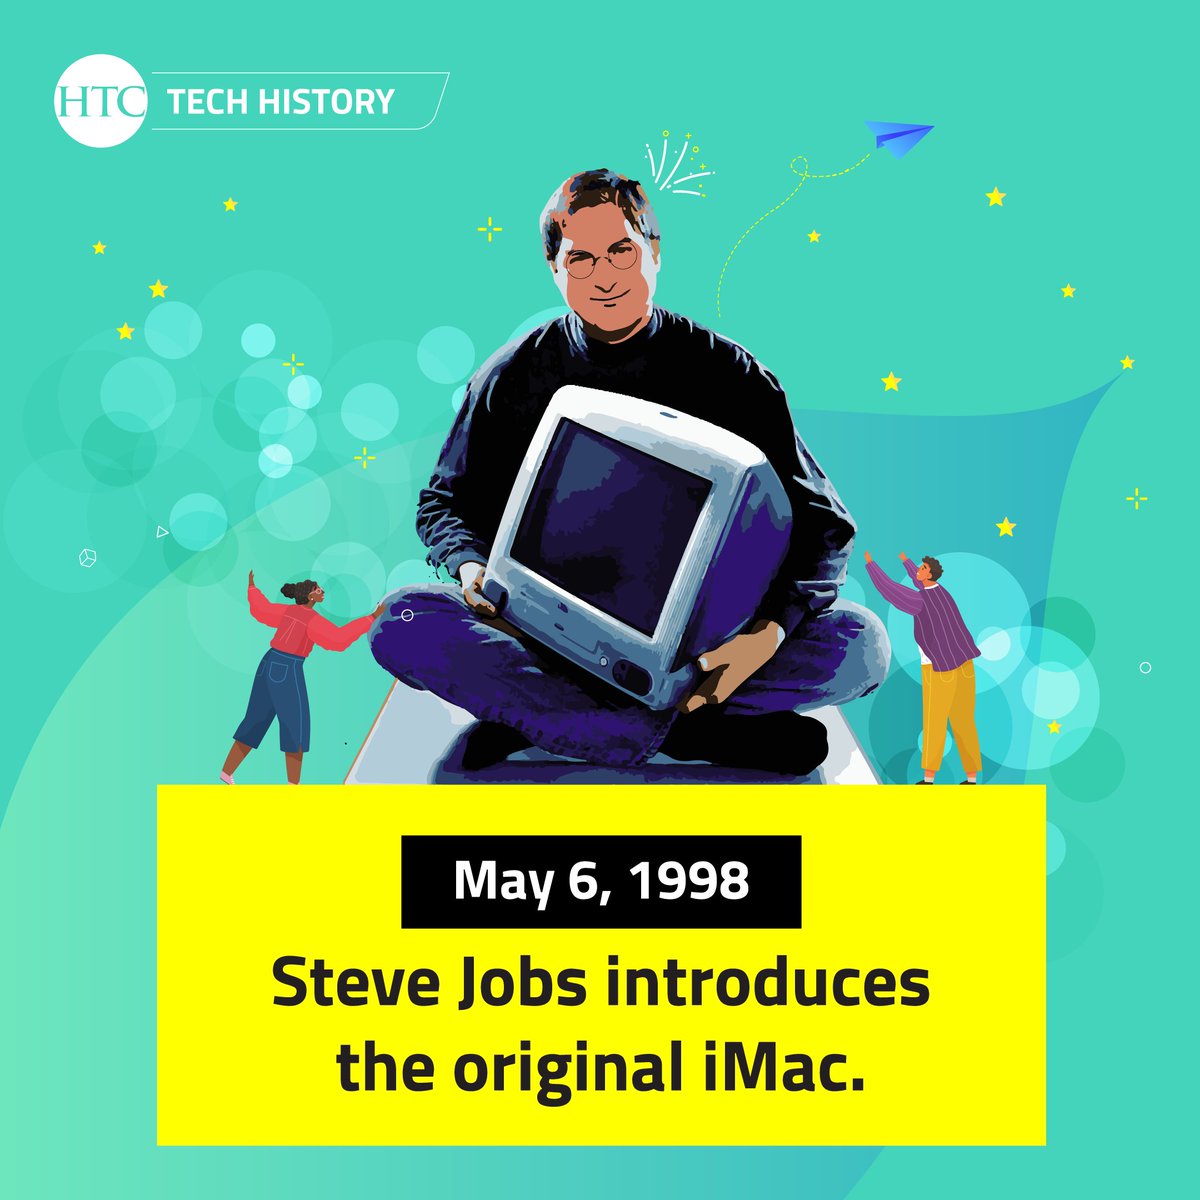 Steve Jobs said: the iMac is “the Internet-age computer for the rest of us.” 🌐

#internet #iMac #SteveJobs #Apple #techhistory